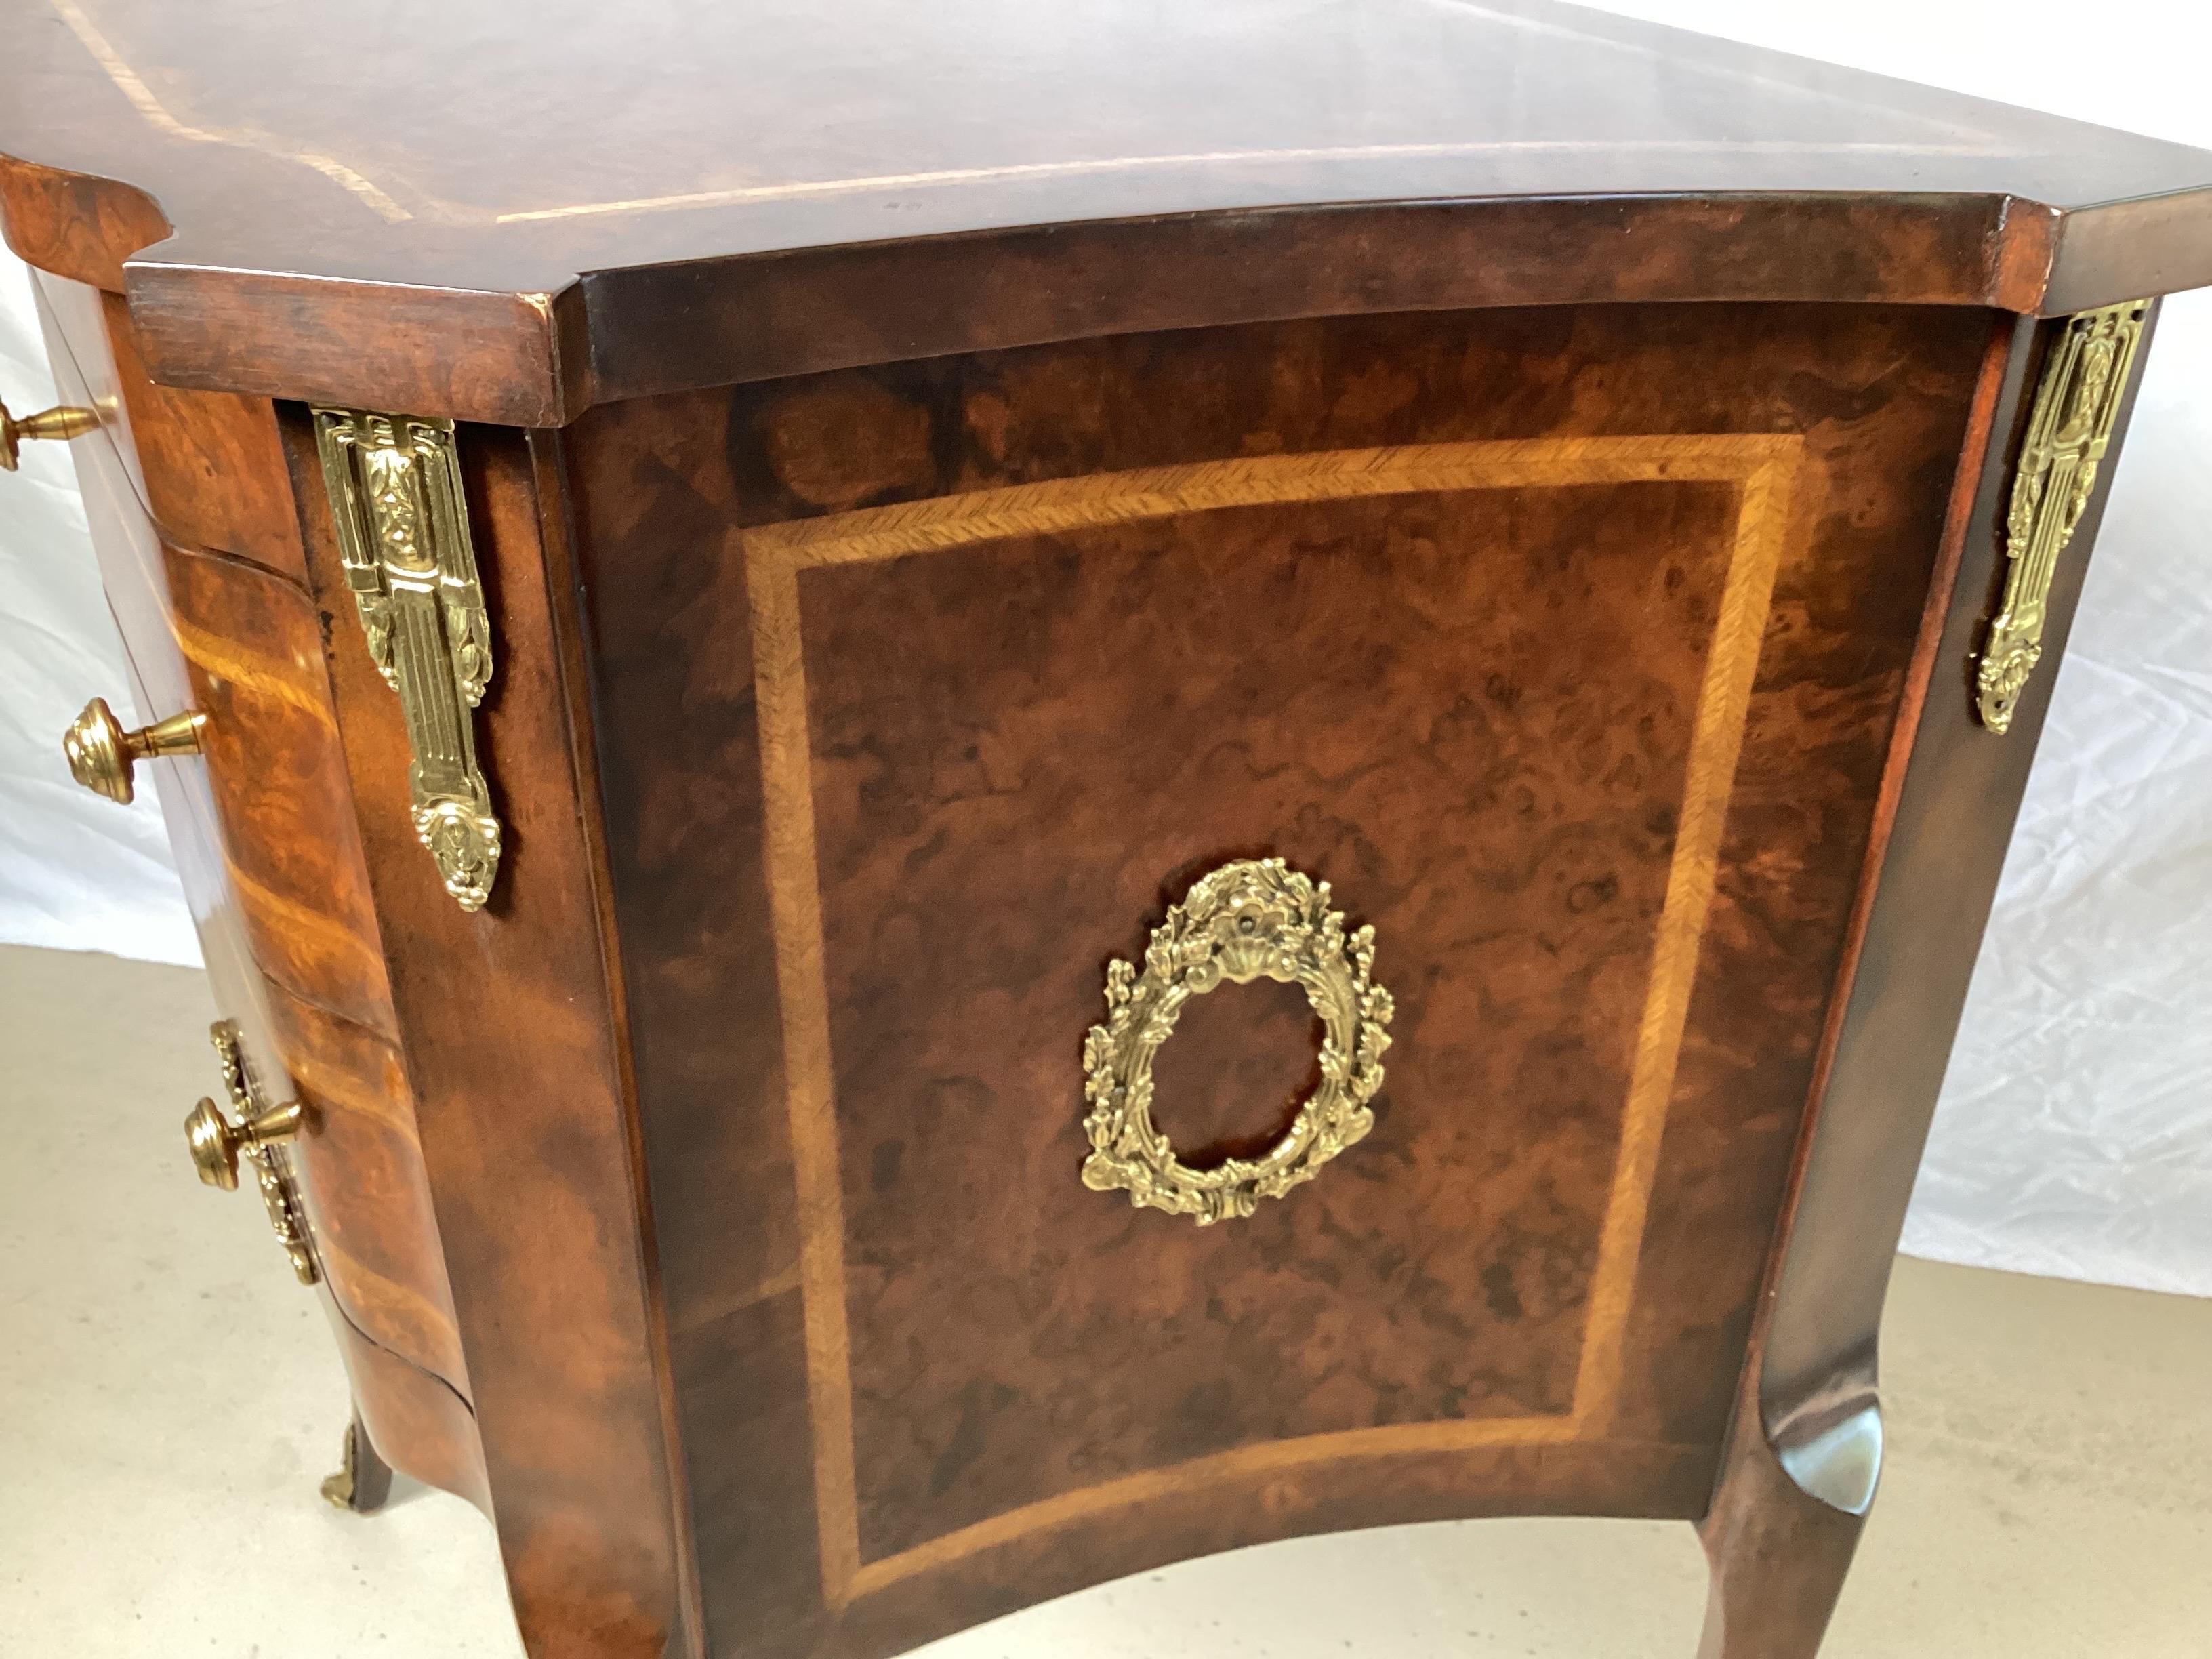 Diminutive Burl Walnut and Satinwood Two Drawer Commode by Maitland Smith 1